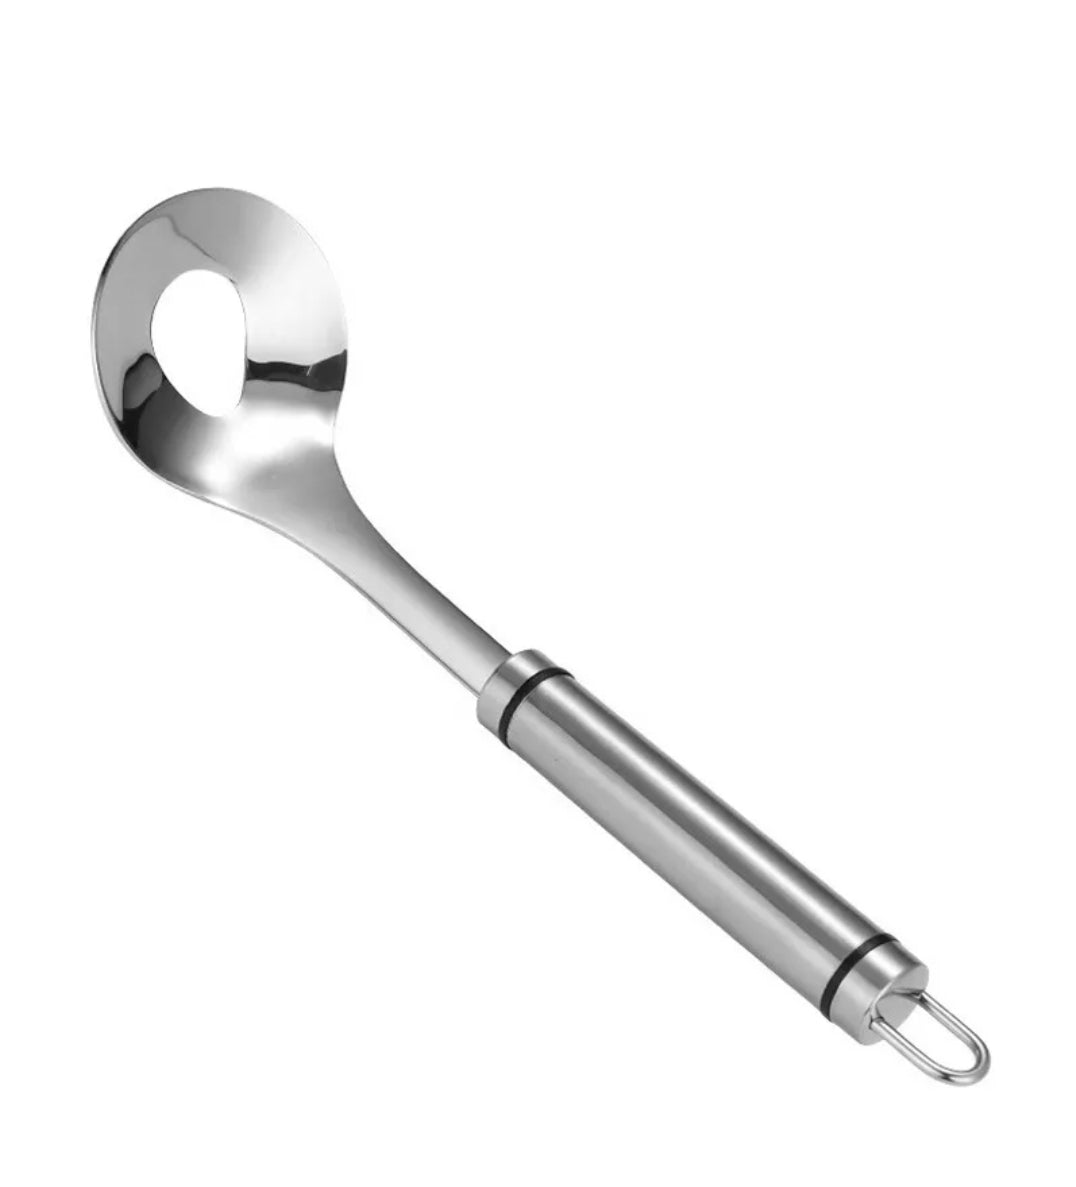 Non stick stainless steel Meatball Maker Spoon